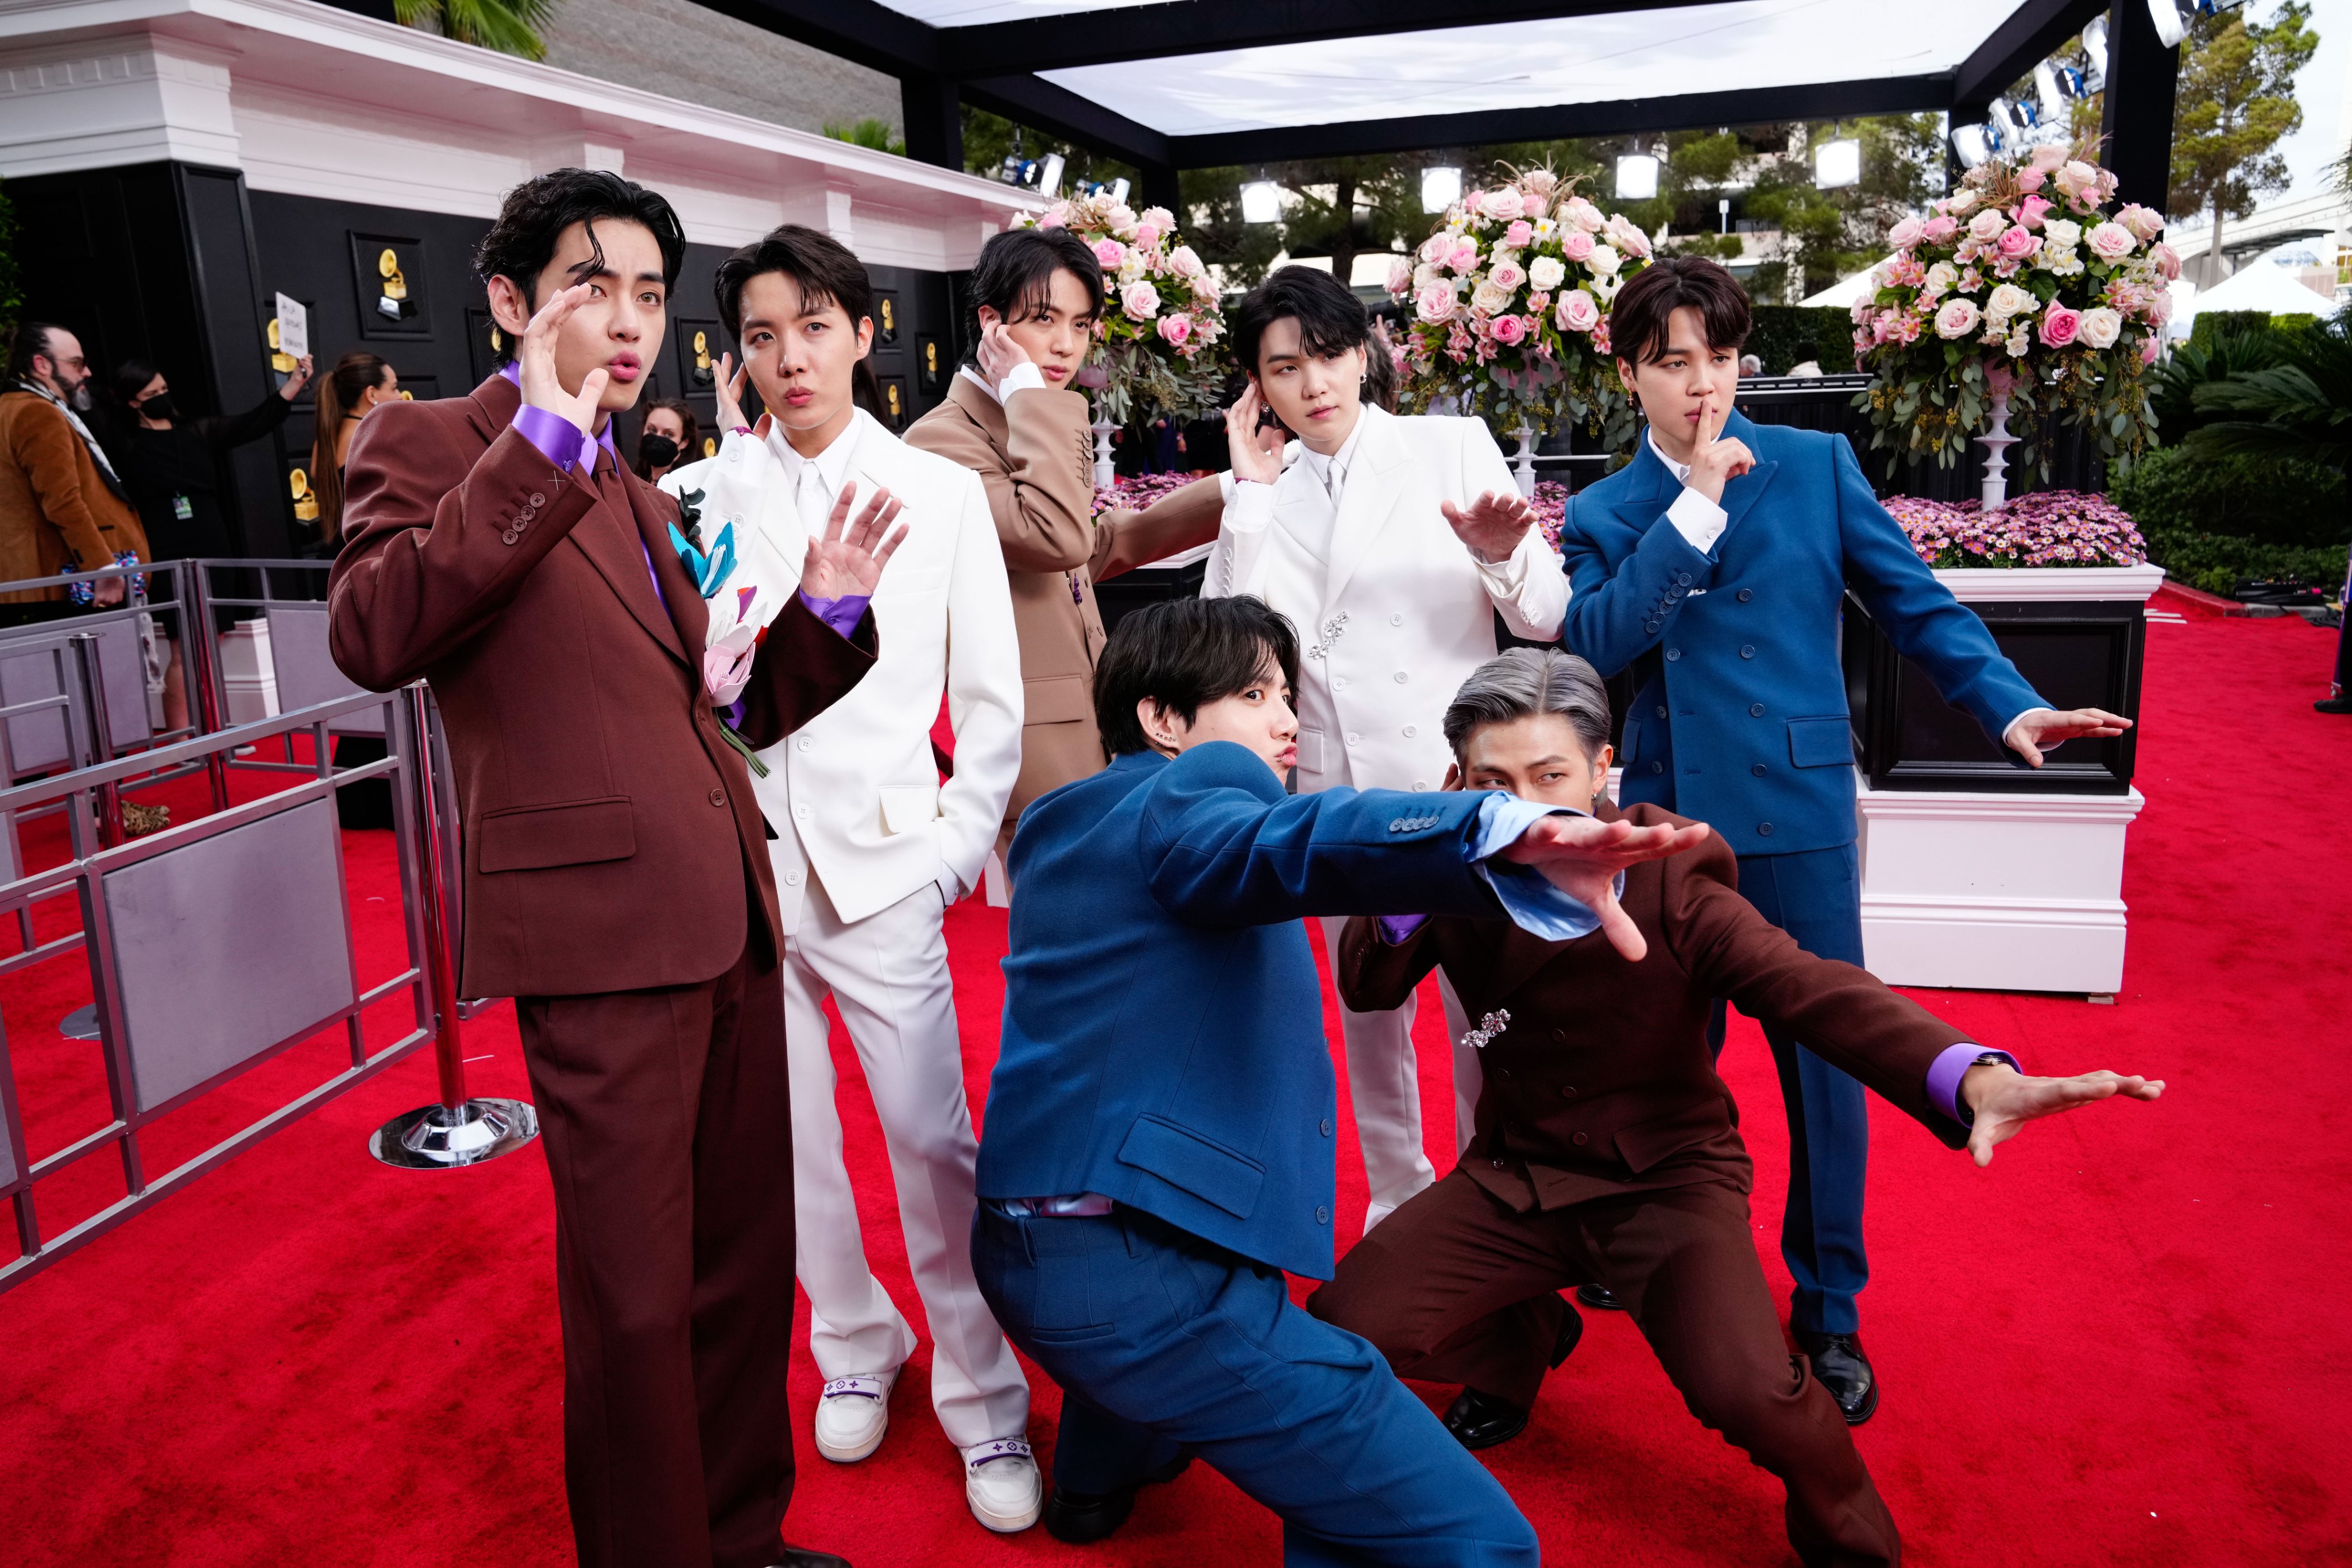 See BTS' Red Carpet Look at the 2022 Grammys